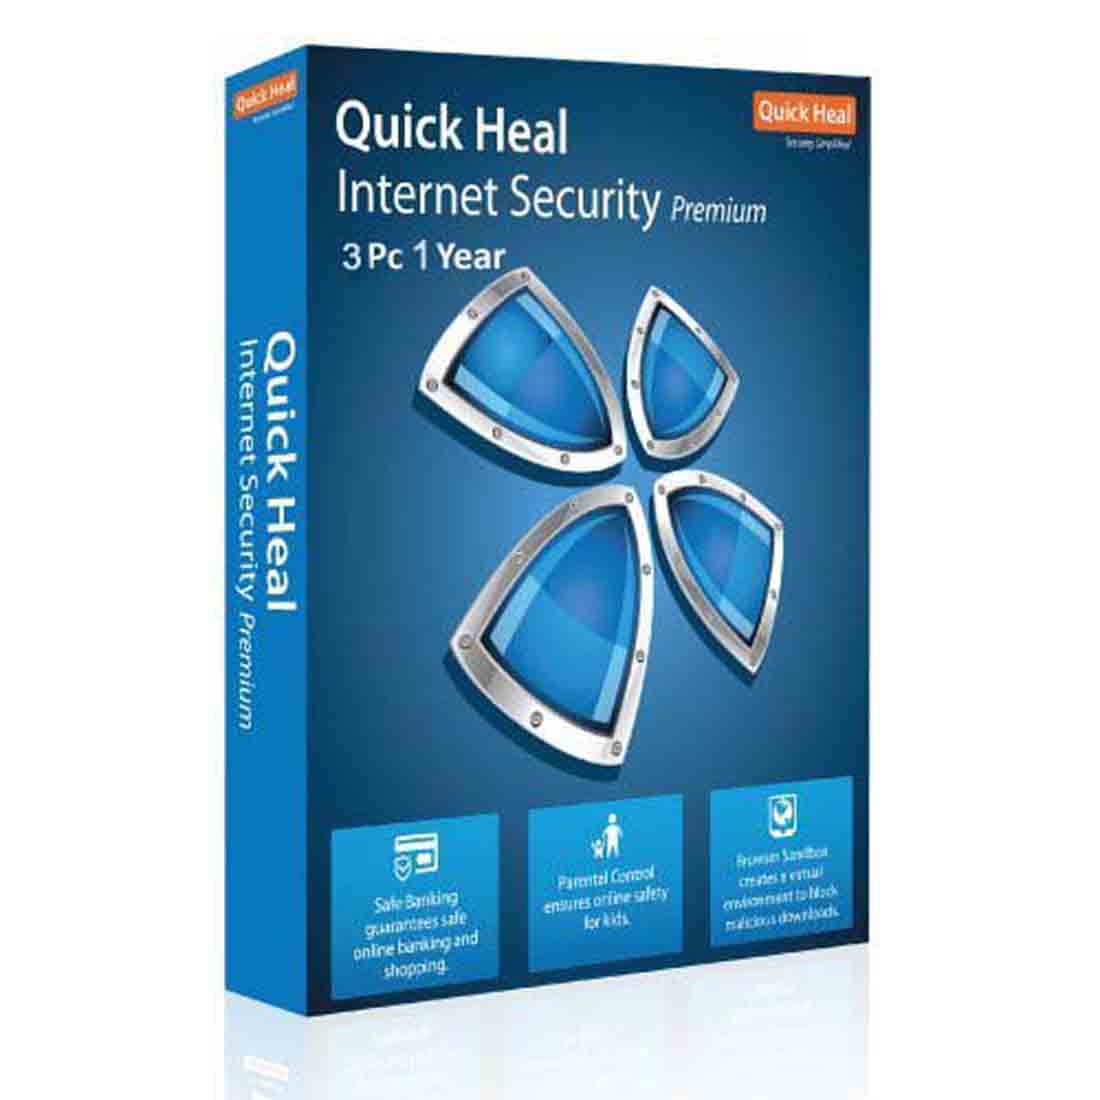 Quick Heal Internet Security 3 Pc 1Year